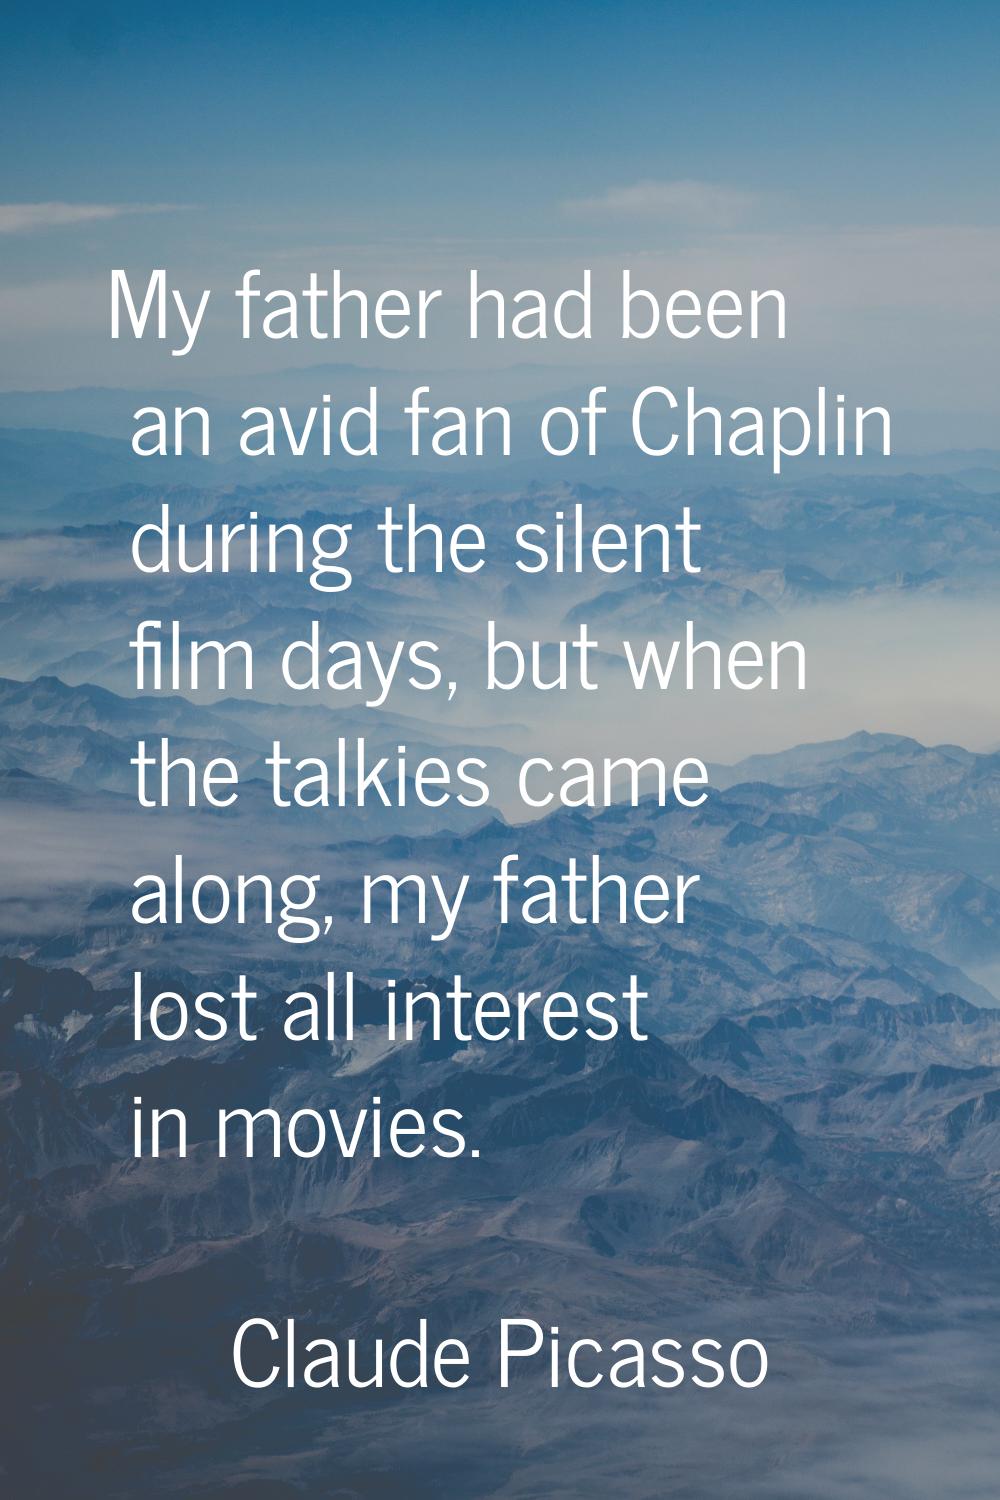 My father had been an avid fan of Chaplin during the silent film days, but when the talkies came al